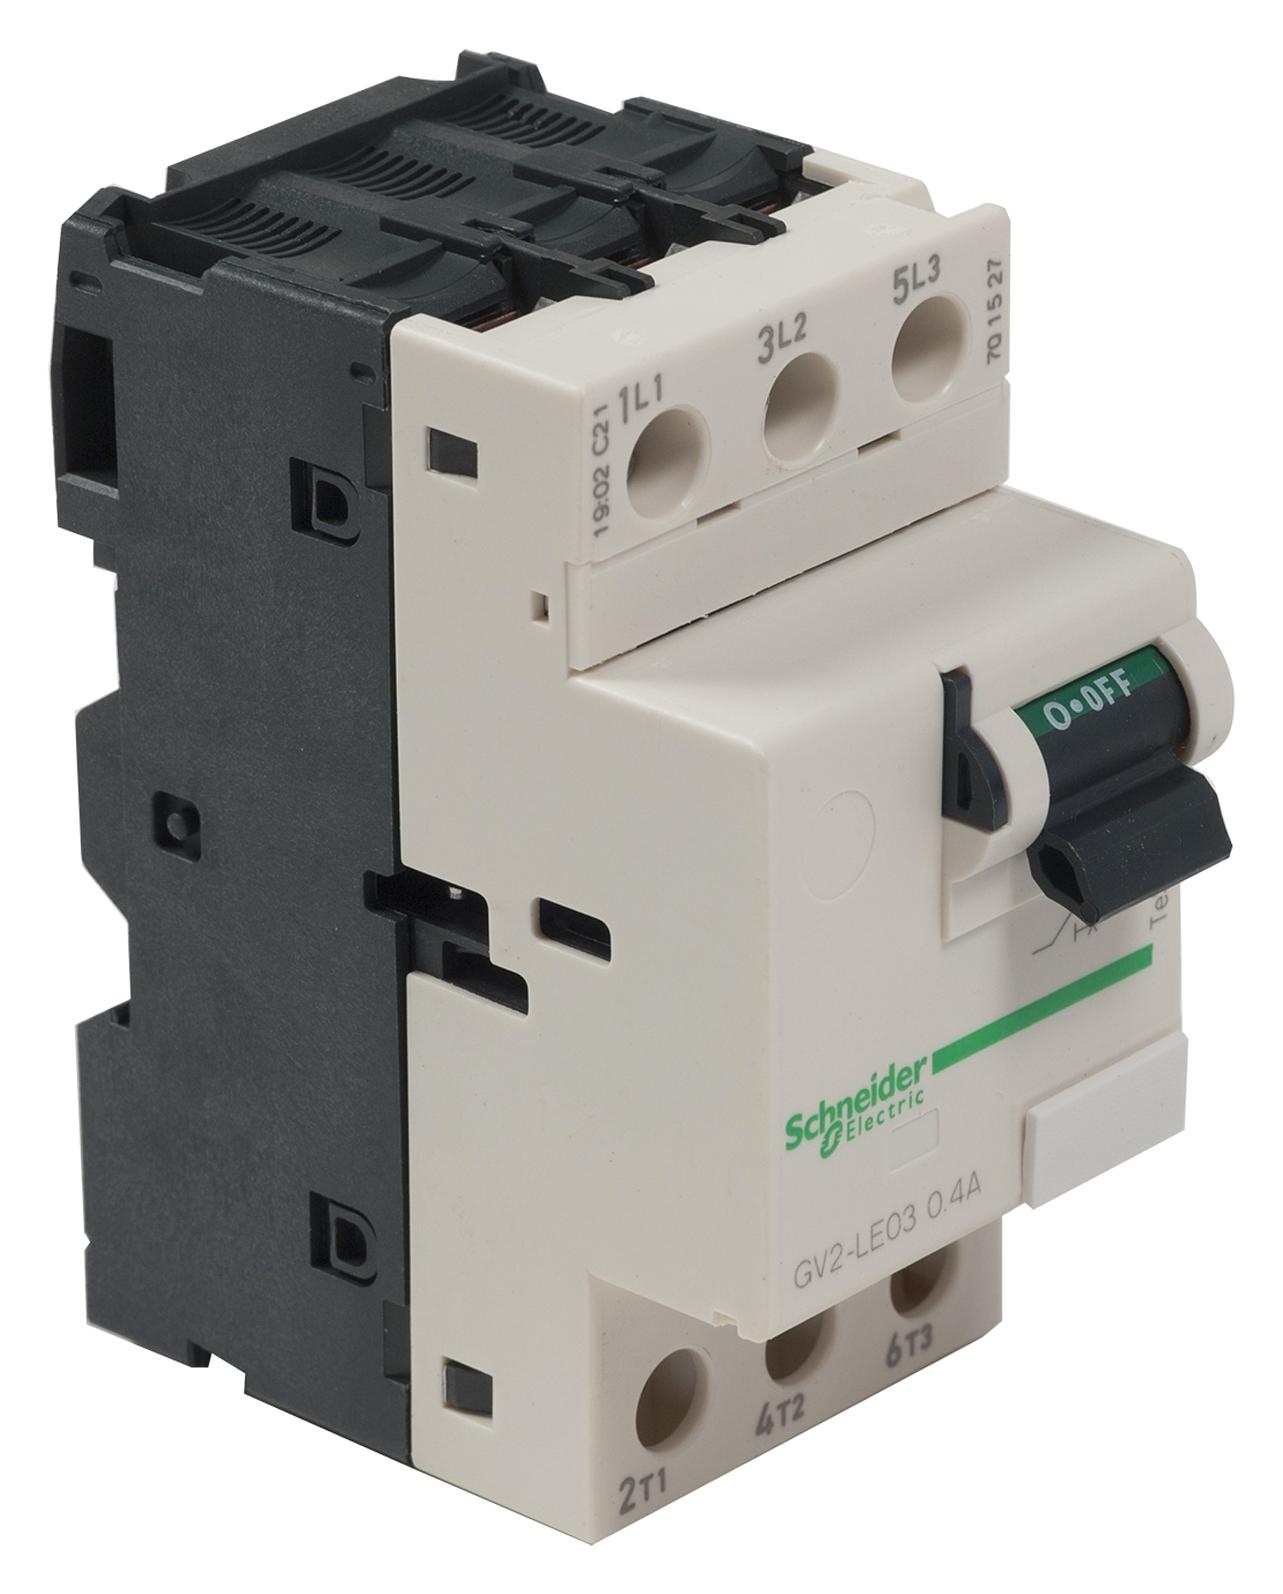 GV2LE03 THERMAL MAGNETIC CIRCUIT BREAKER SCHNEIDER ELECTRIC